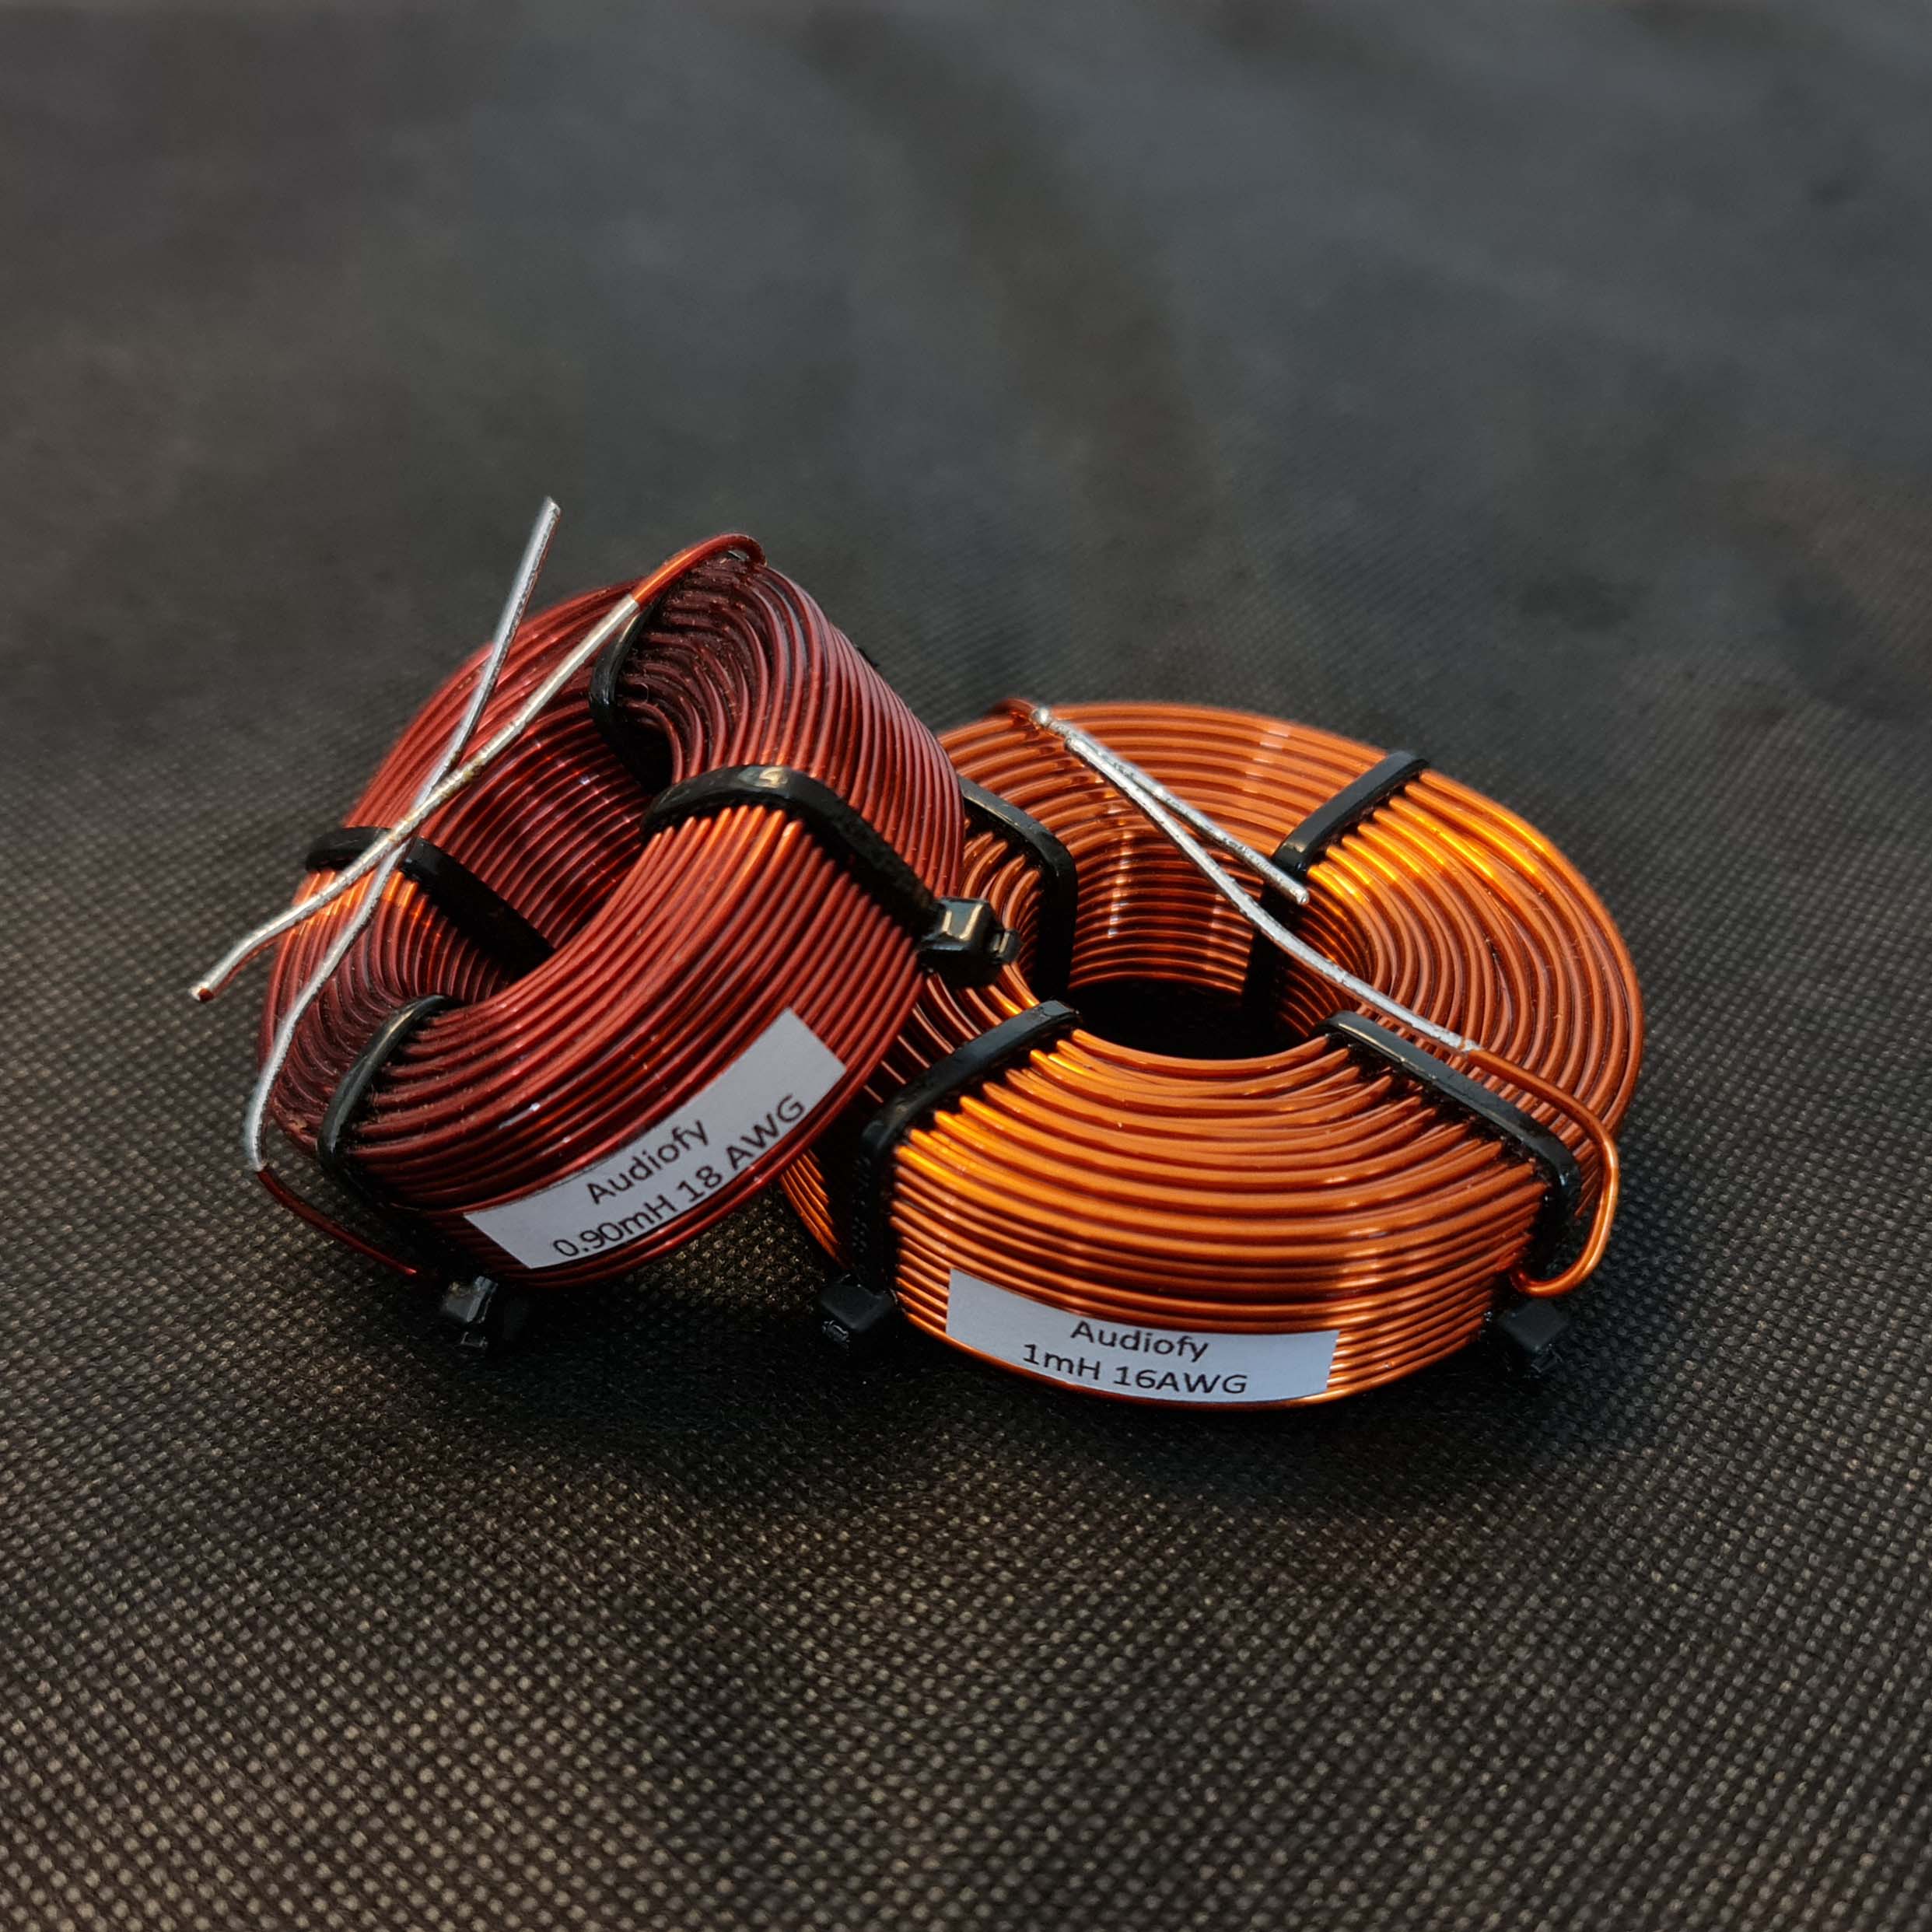 Audiofy 0.30mH 18 AWG Air Core Crossover Inductor